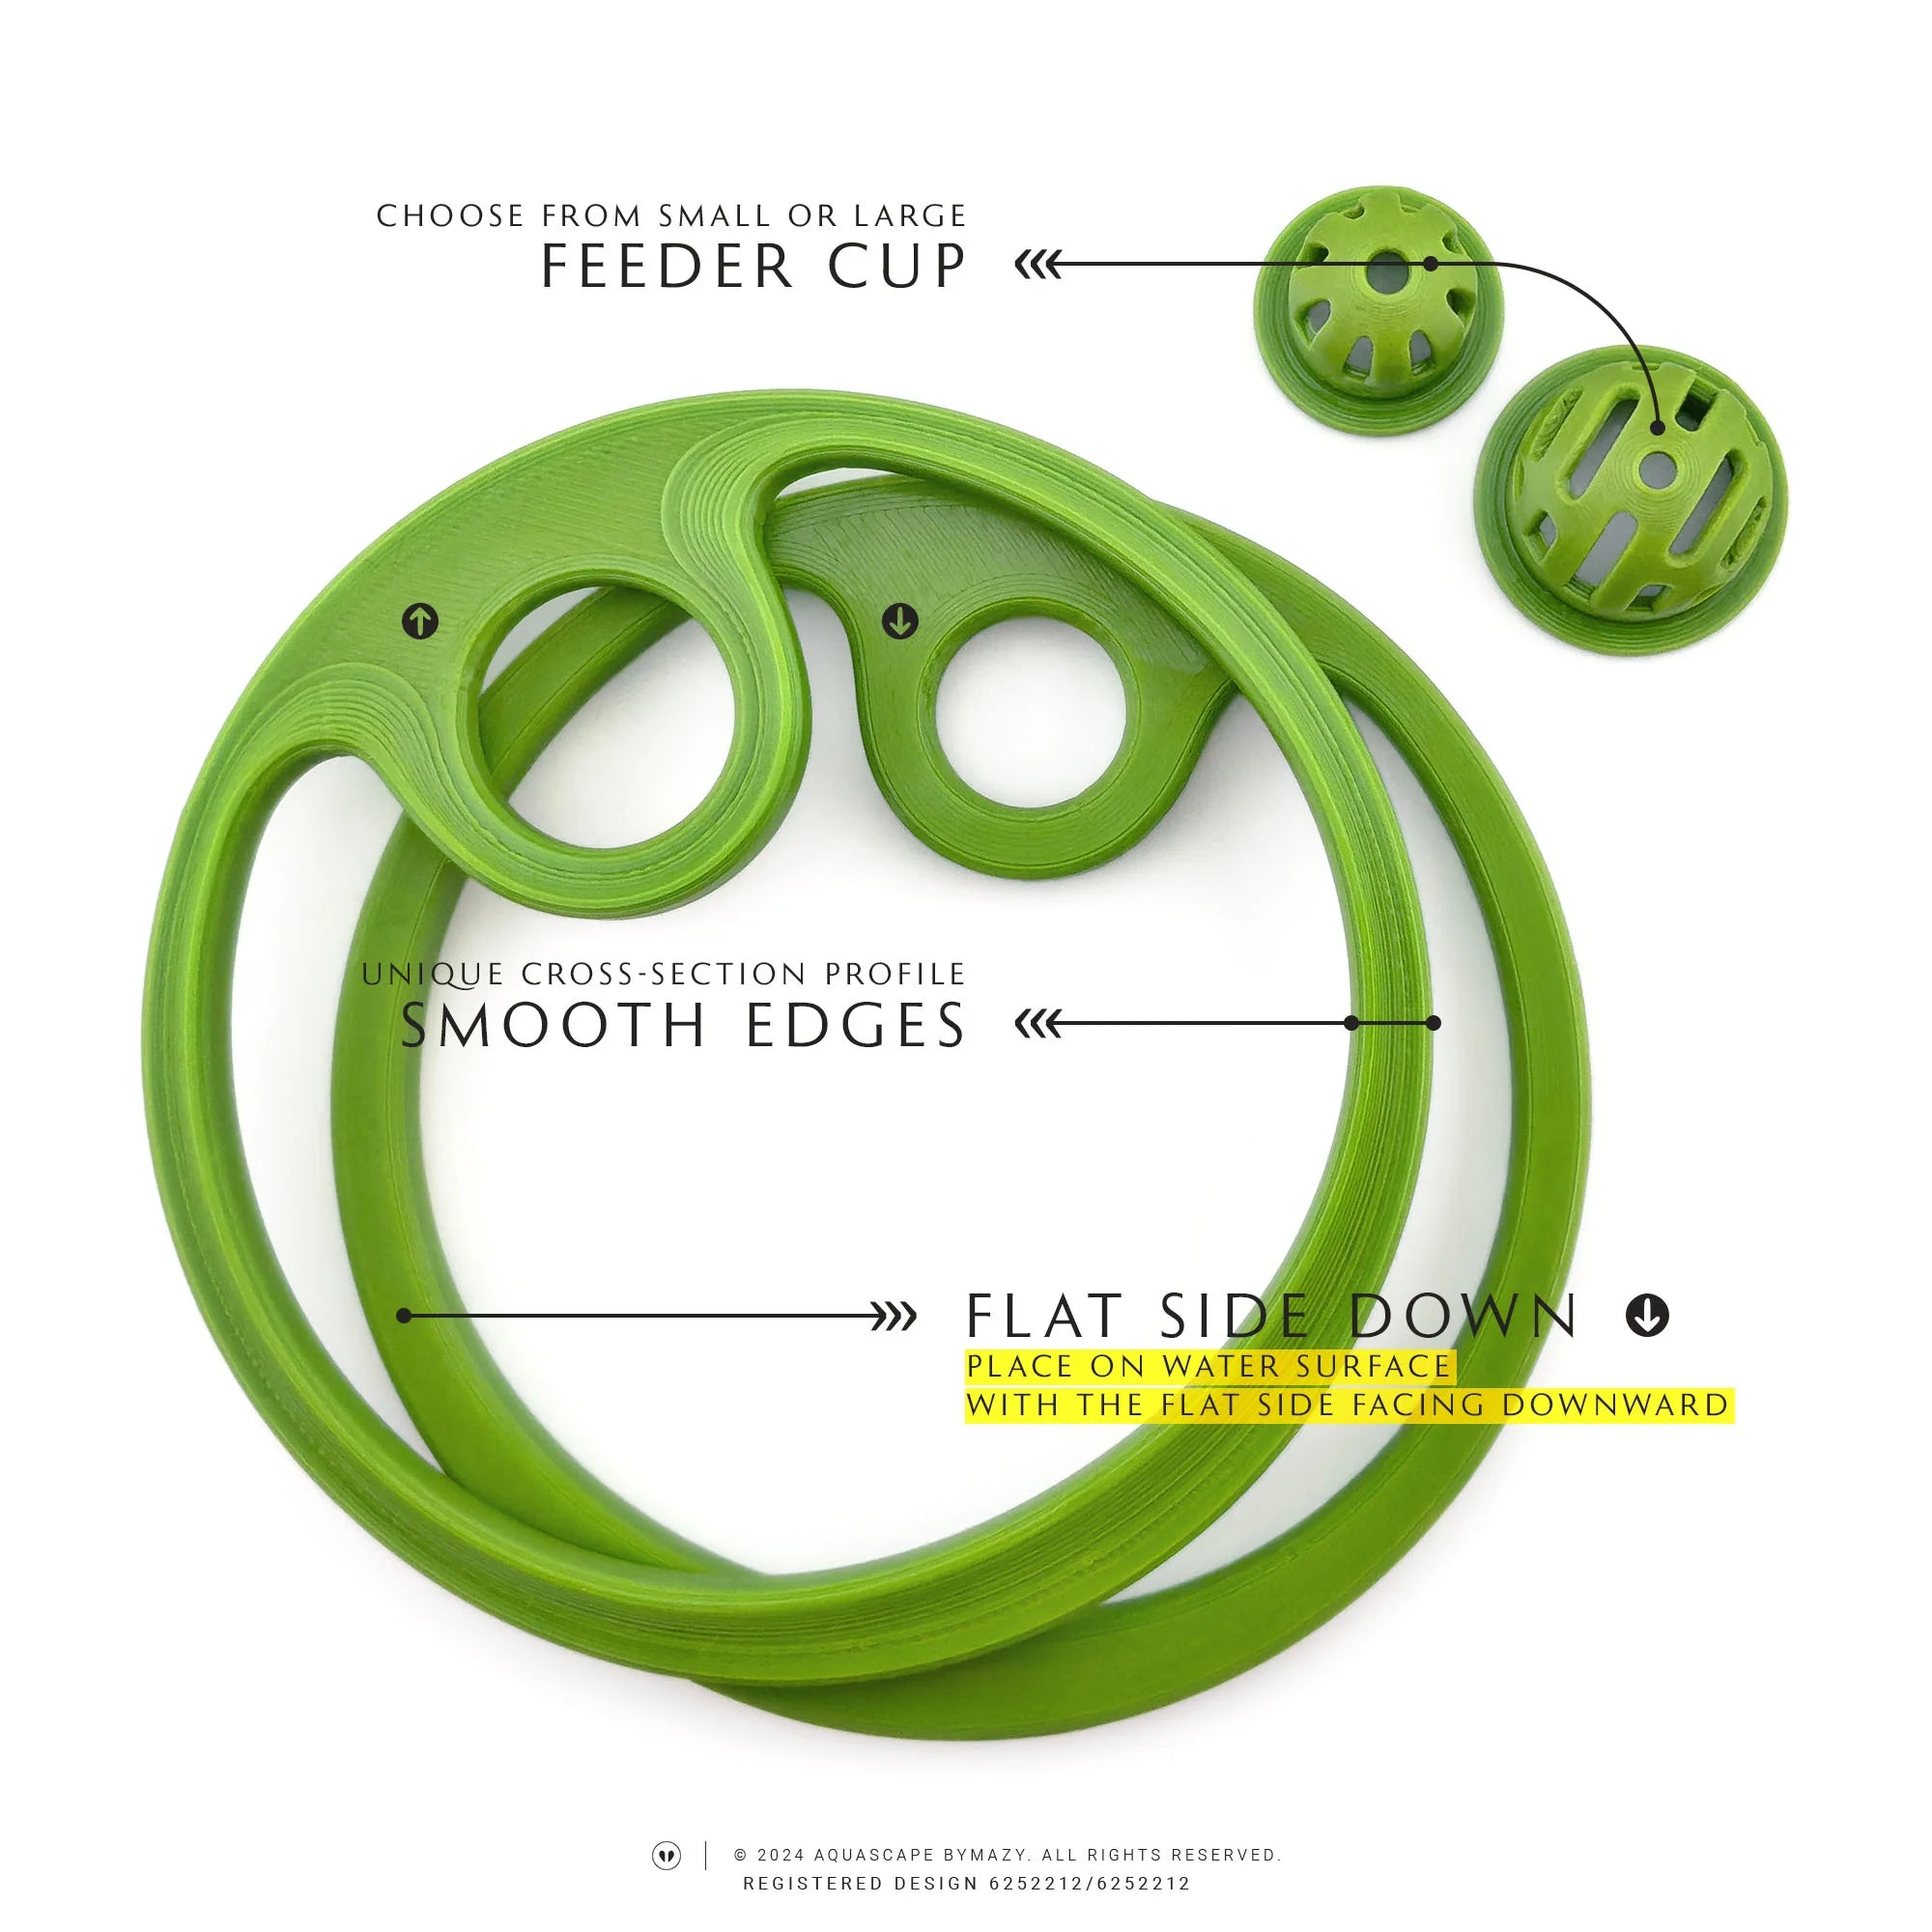 Floating feeding ring for fish tank with small or large feeder cup and smooth edges in yellow green byMazy.